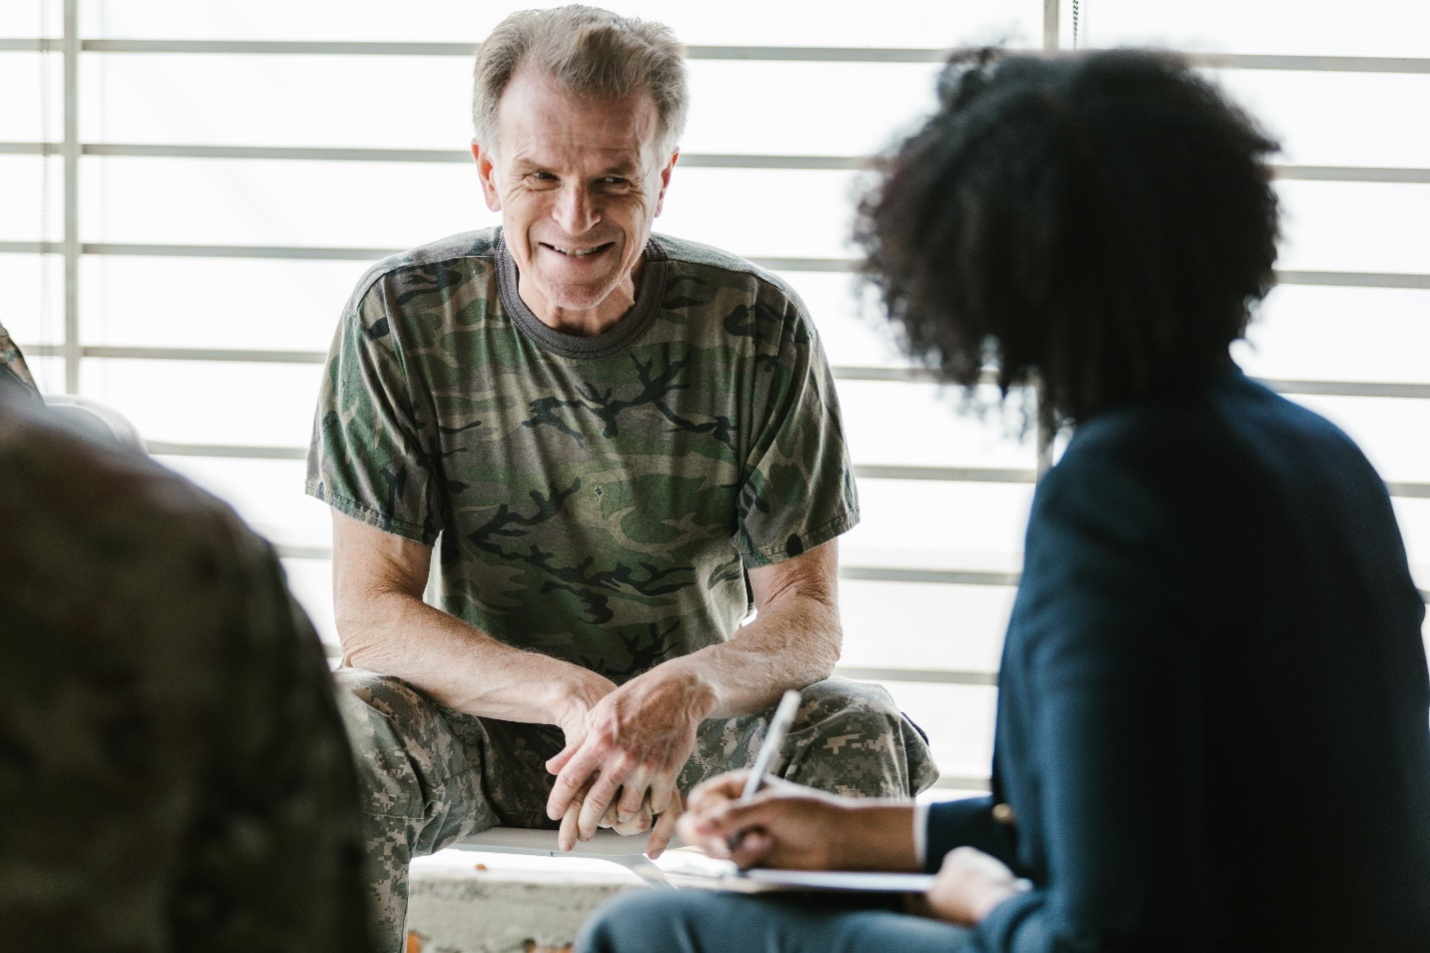 A man in Cammo print smiles at his therapist, showcasing the emotional impact of addiction therapy.